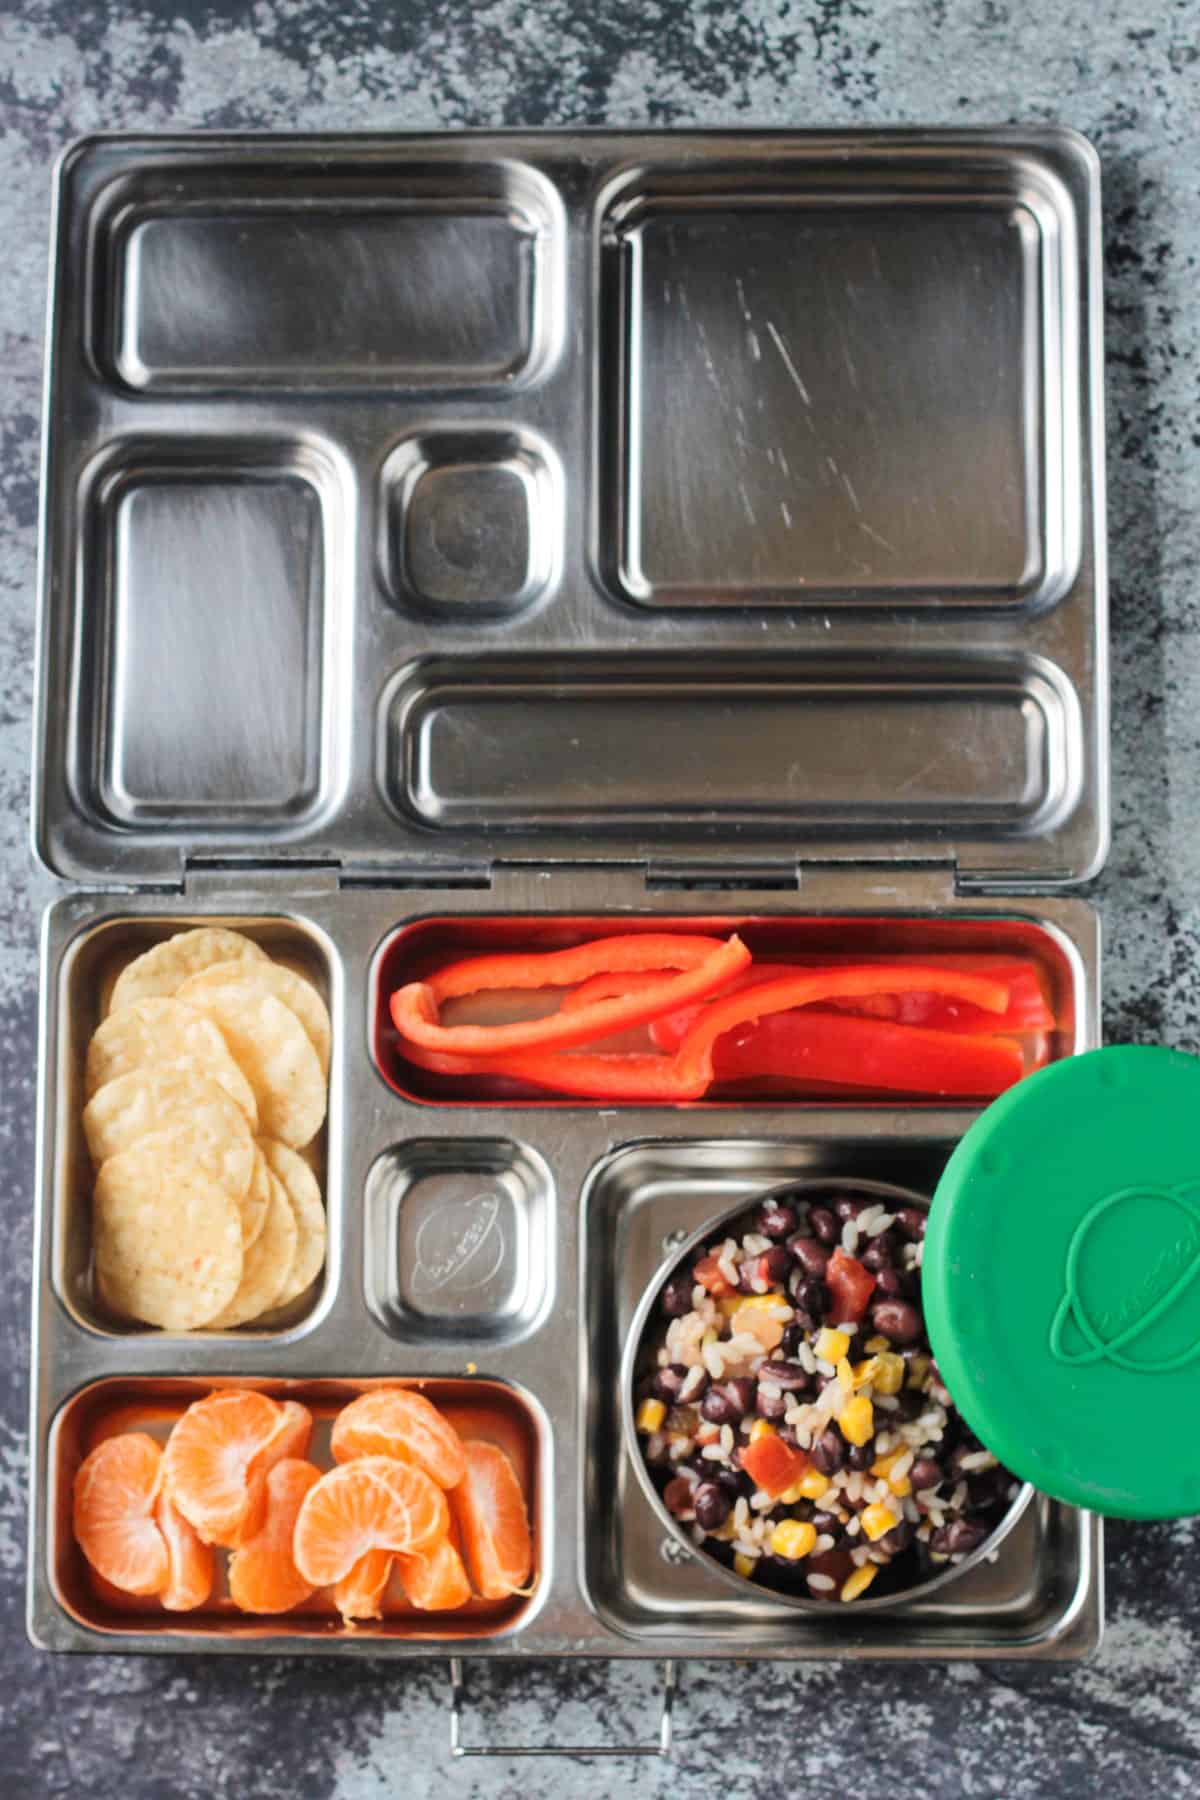 Bento style lunch box: rice and beans, orange slices, tortilla chips, red pepper slices.